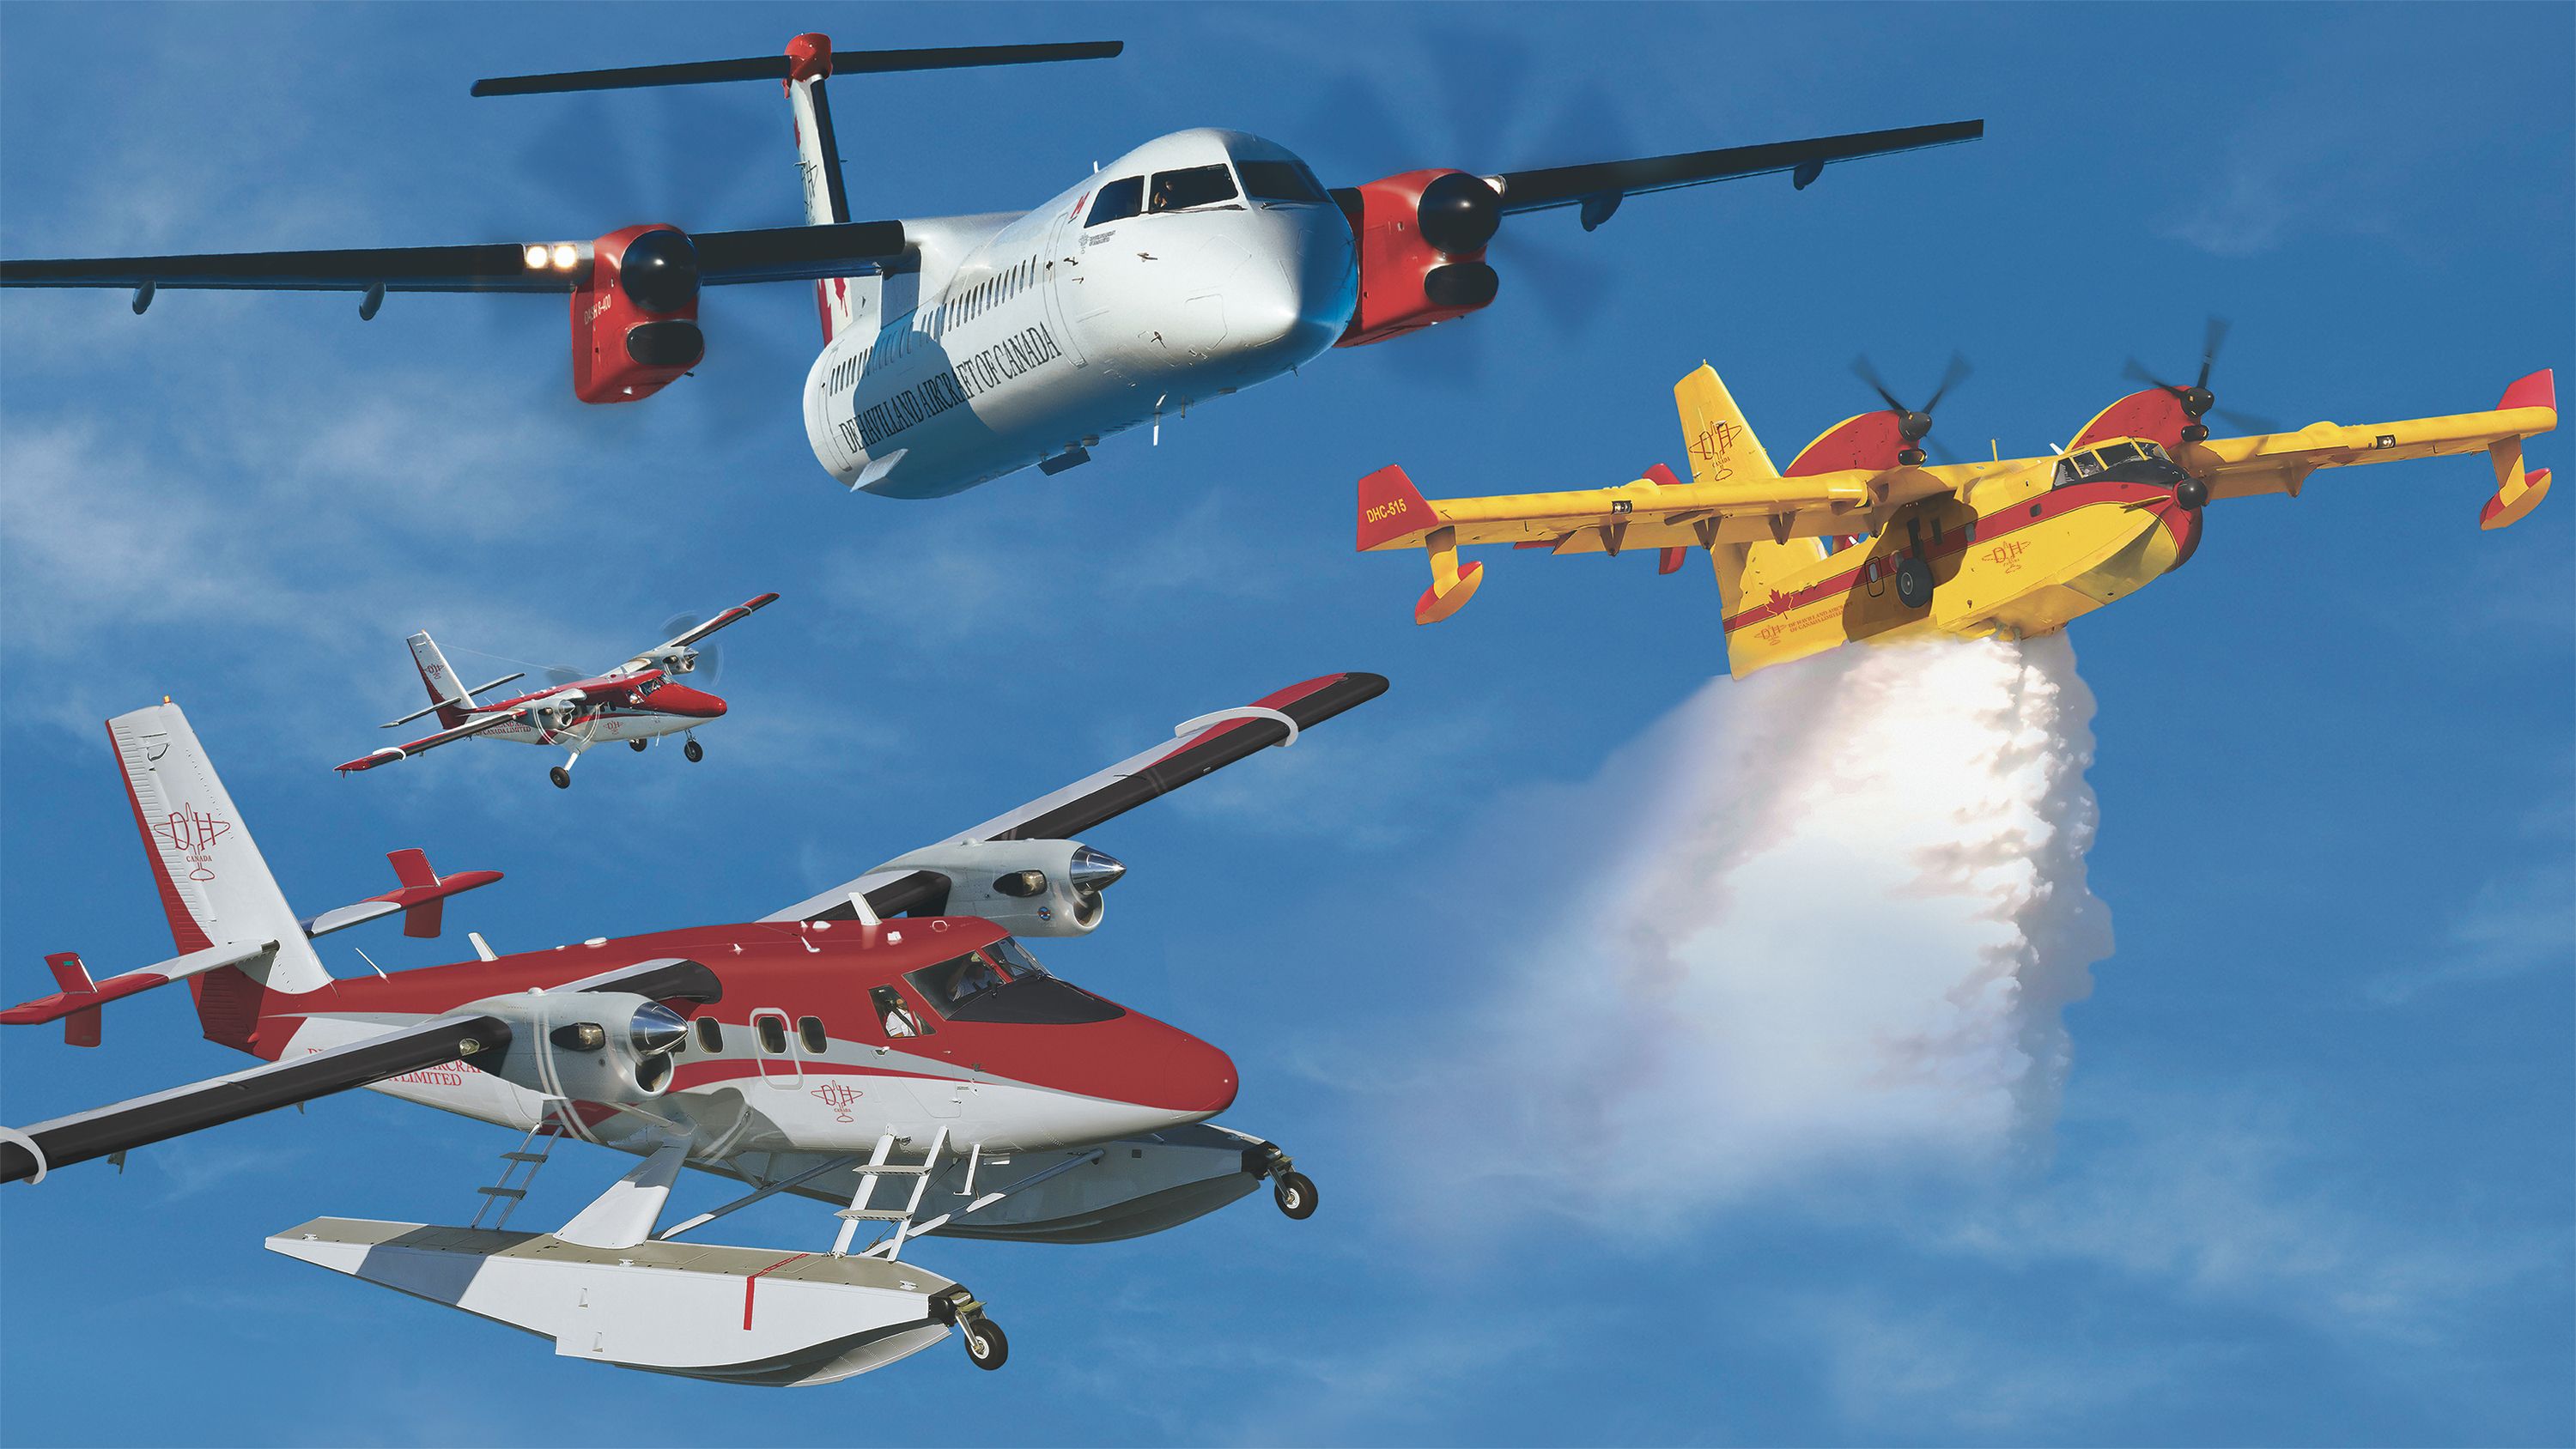 De Havilland Dash 8 DHC-6 Twin Otter family all together